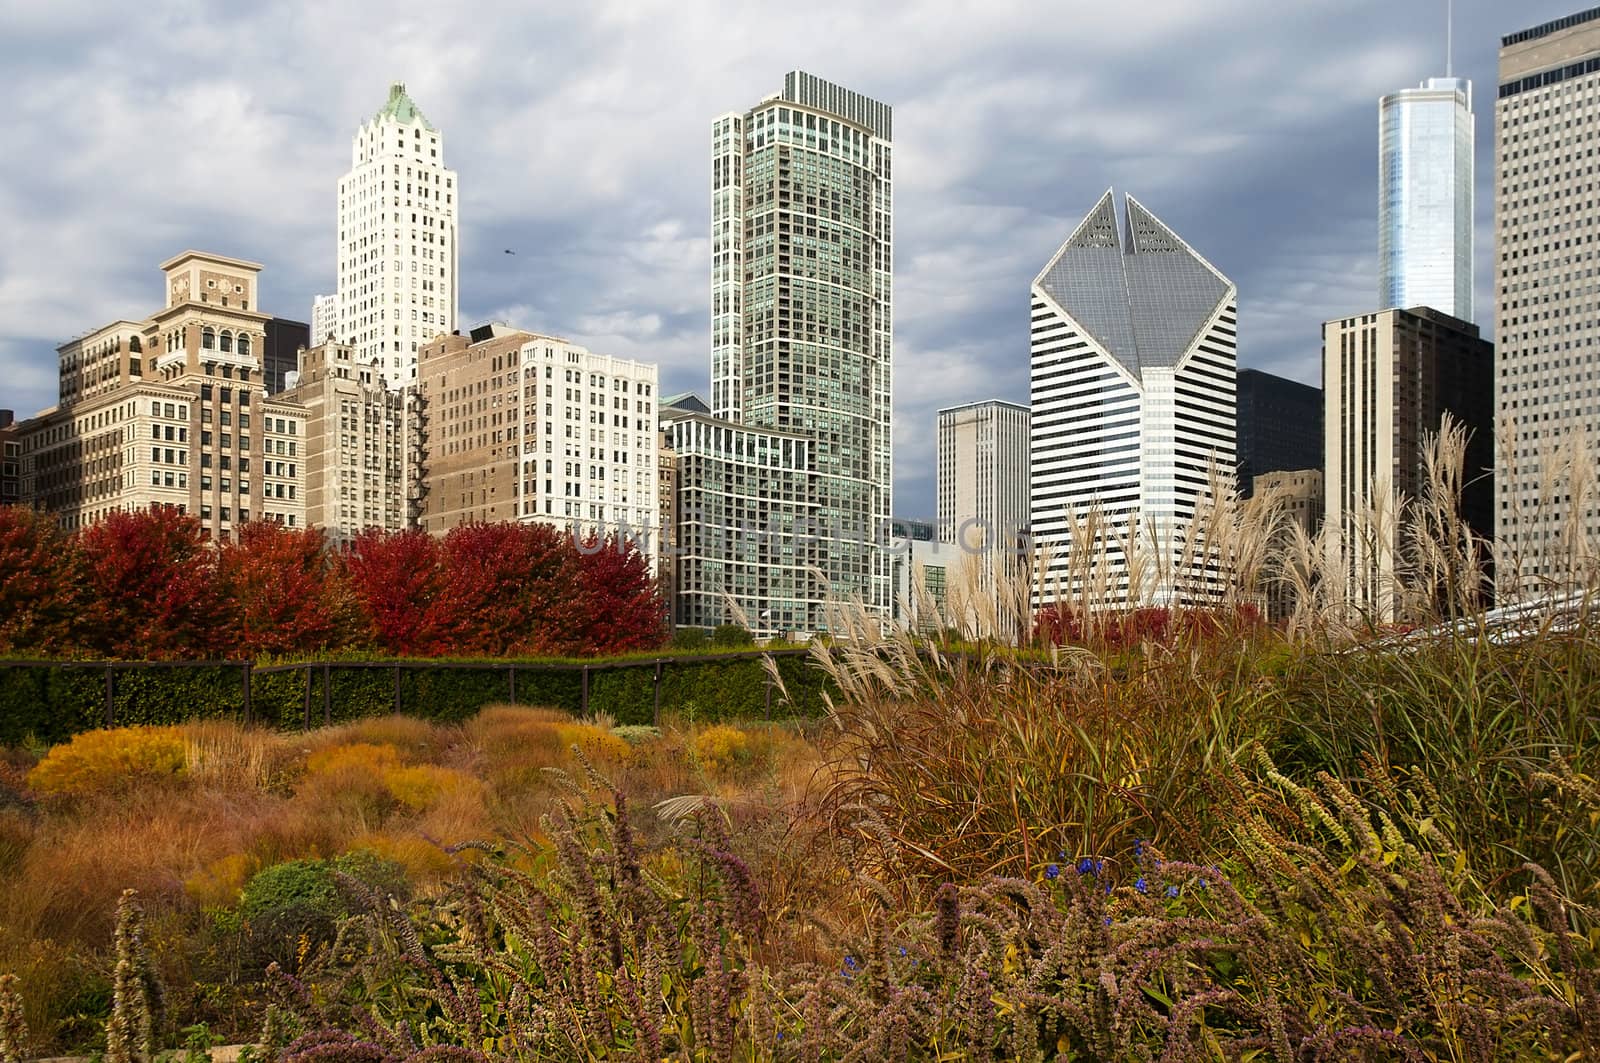 Skyscrapers in Chicago in autumn by irisphoto4